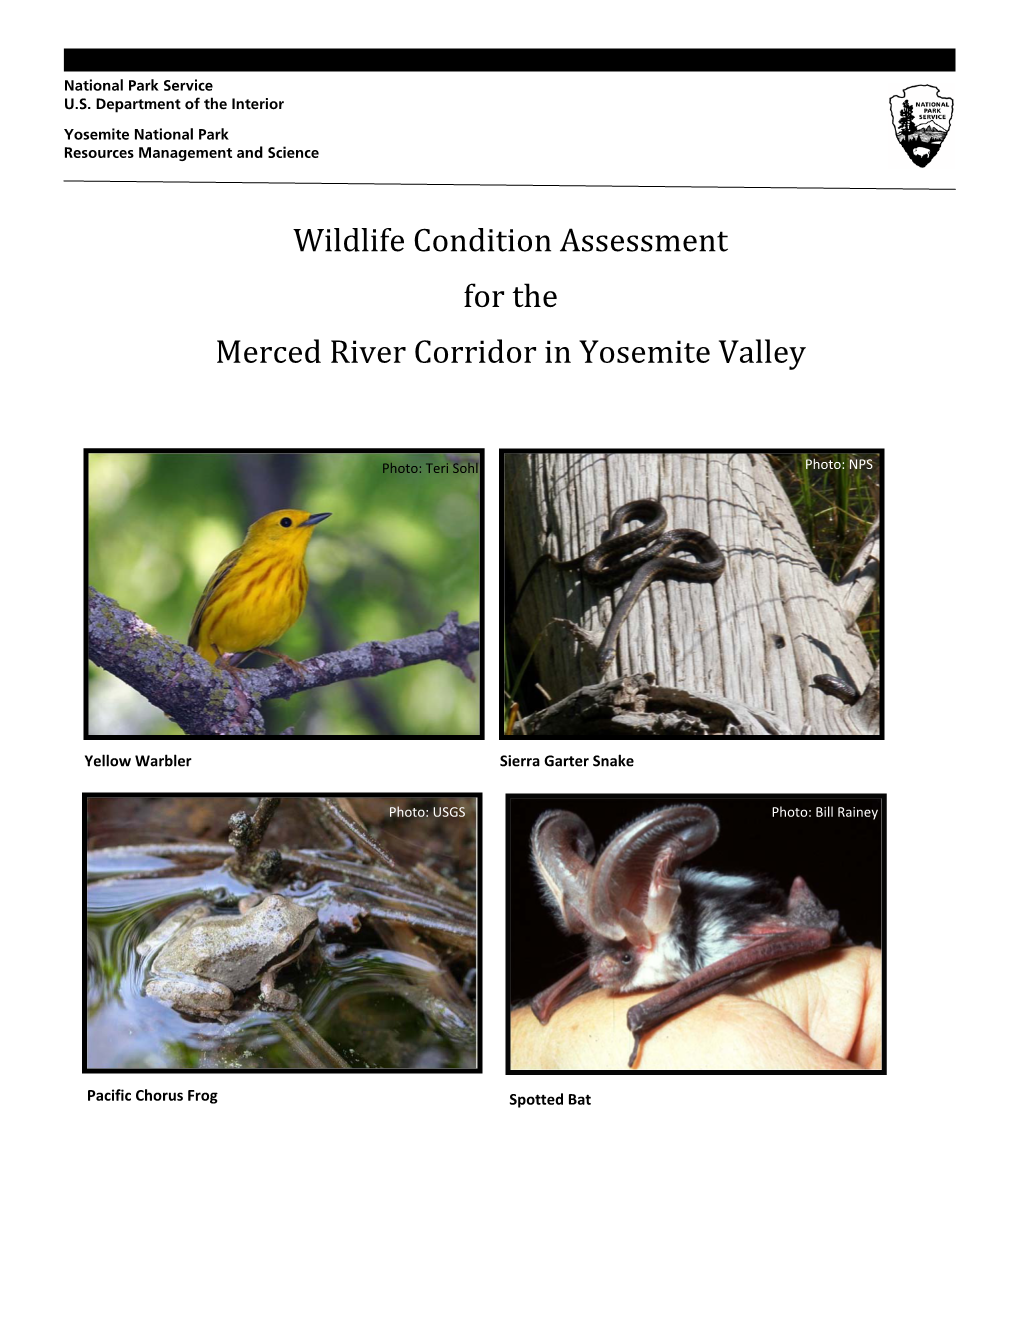 Wildlife Condition Assessment for the Merced River Corridor in Yosemite Valley